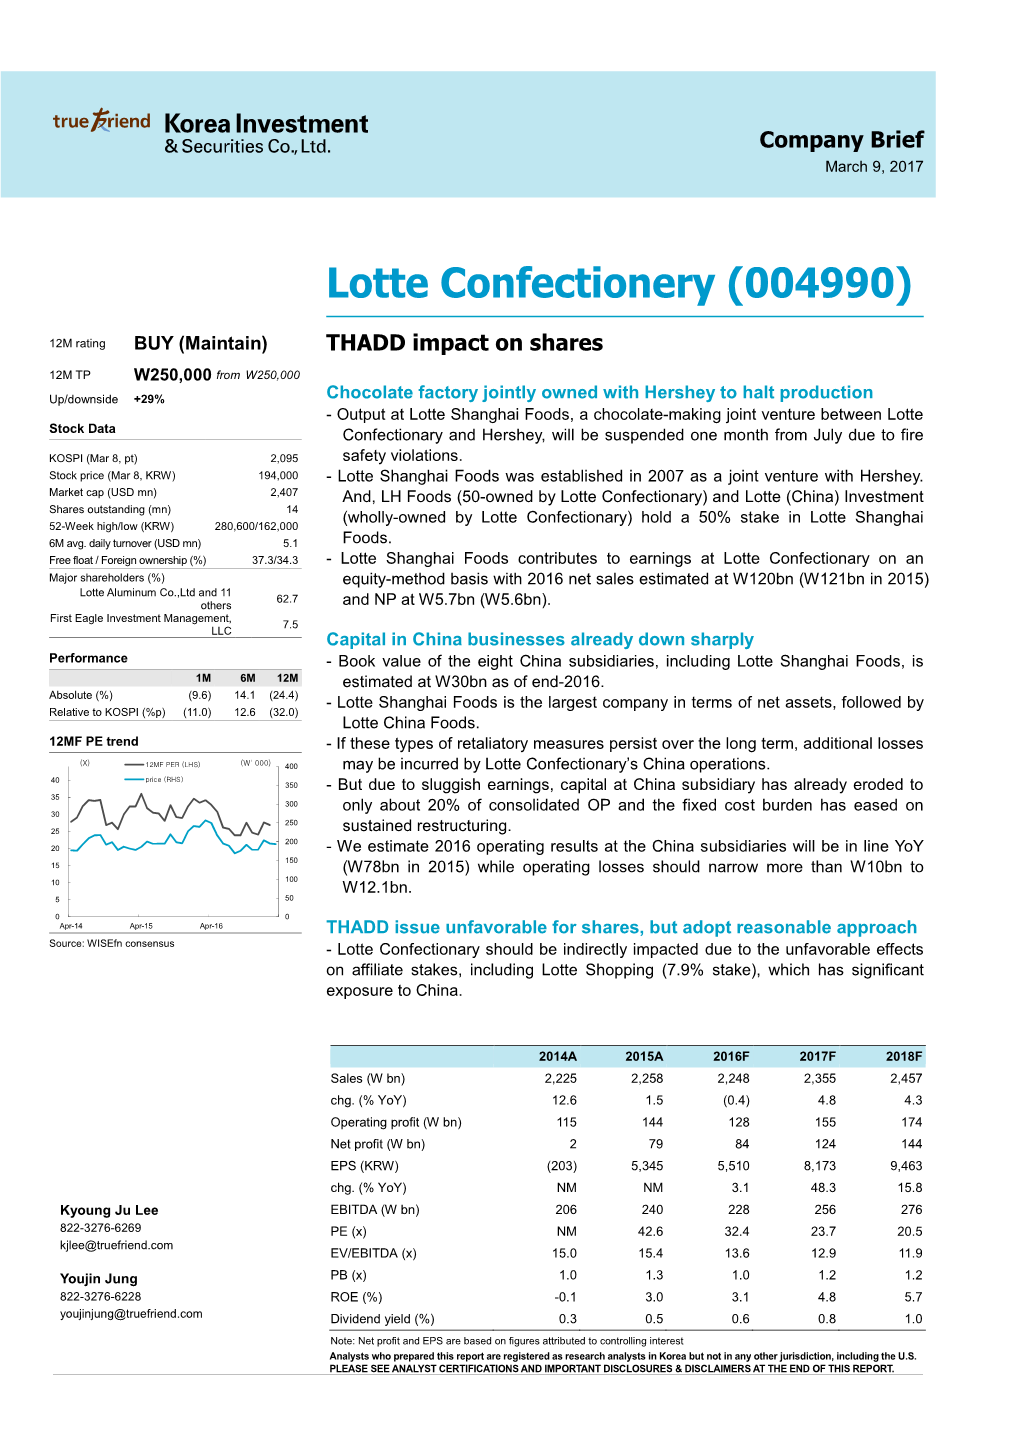 Lotte Confectionery (004990)